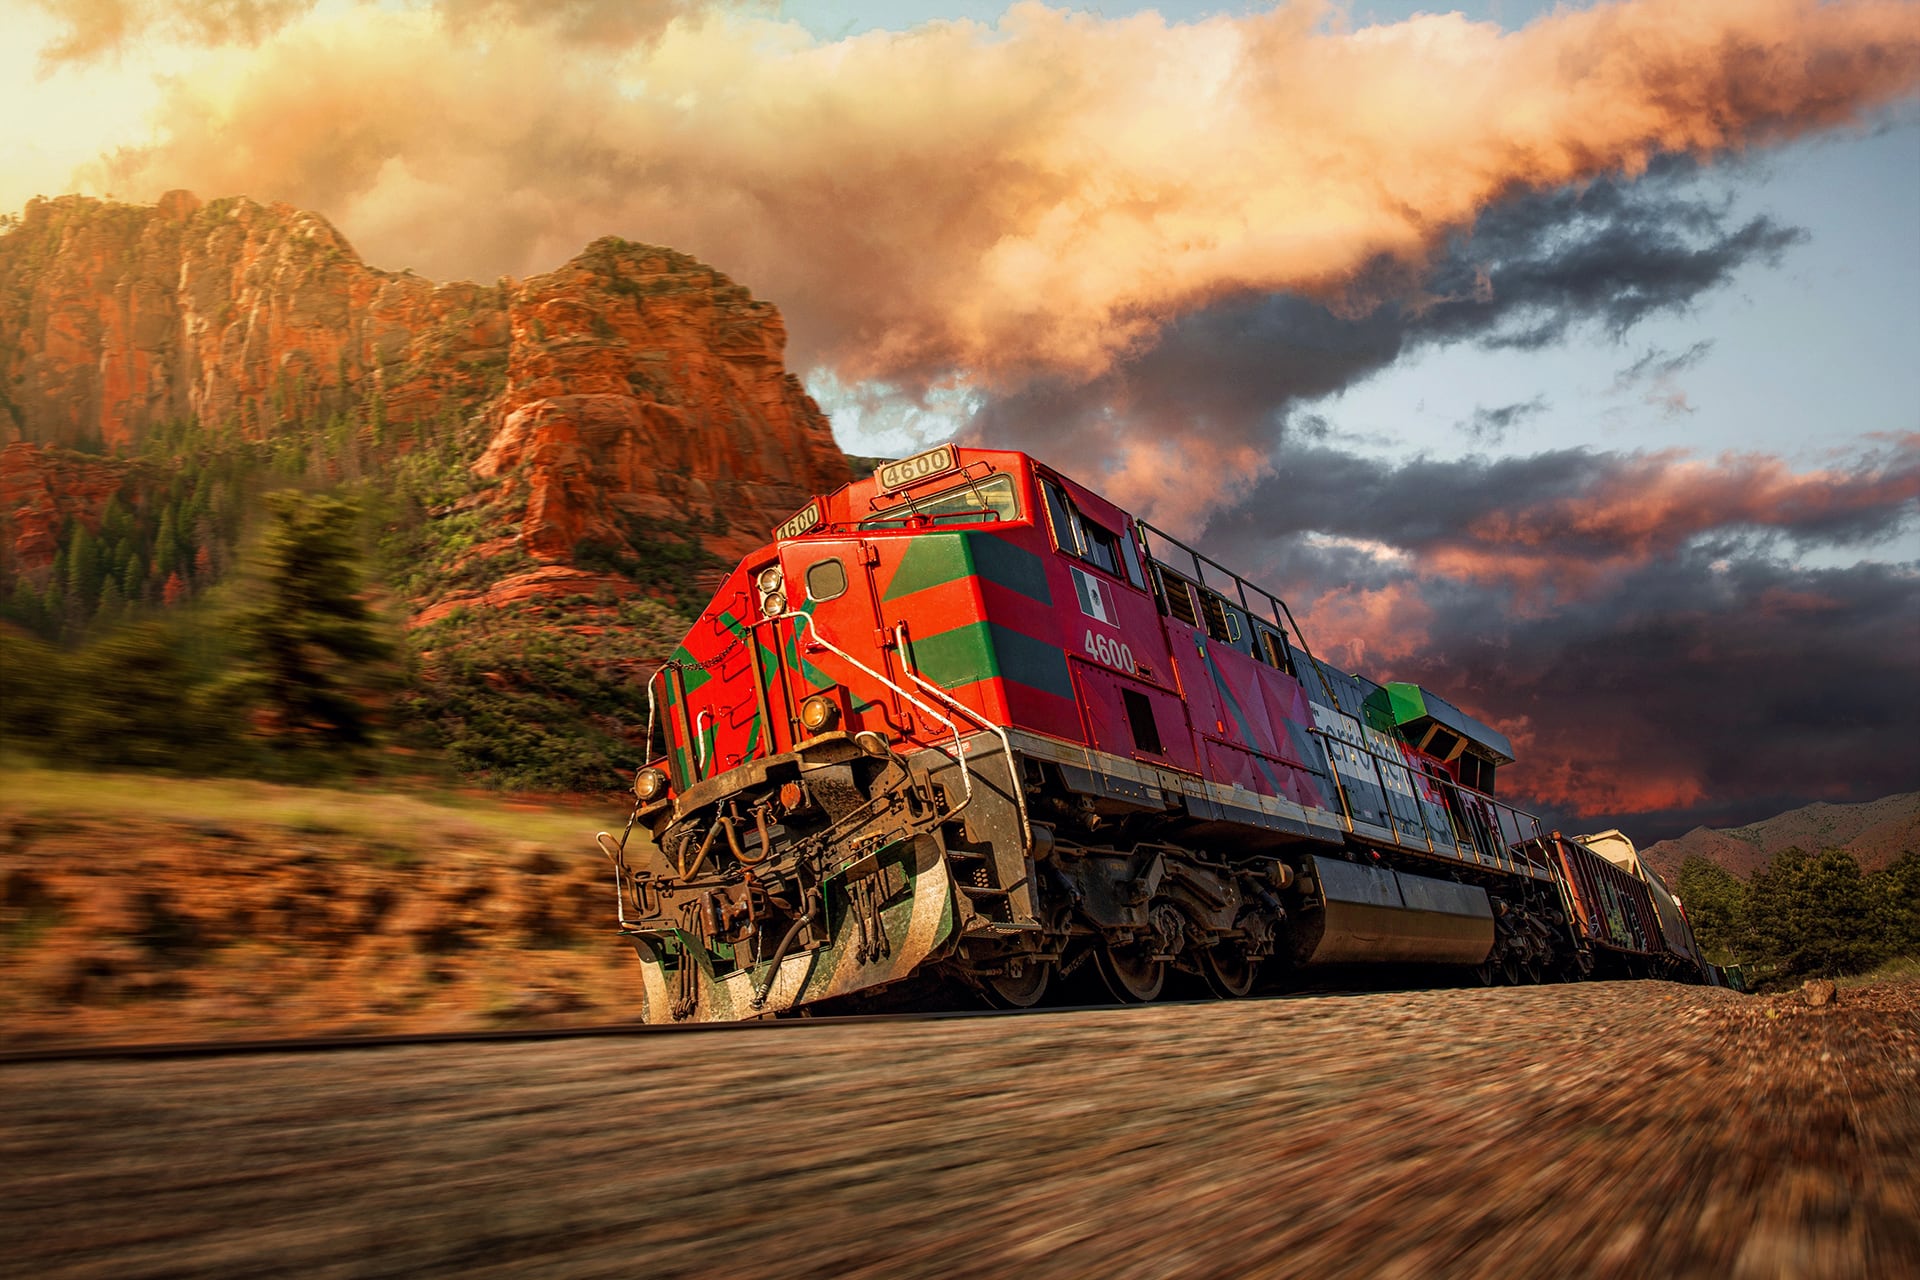 Ferromex Freight Train photographed by Commercial Photographer Blair Bunting